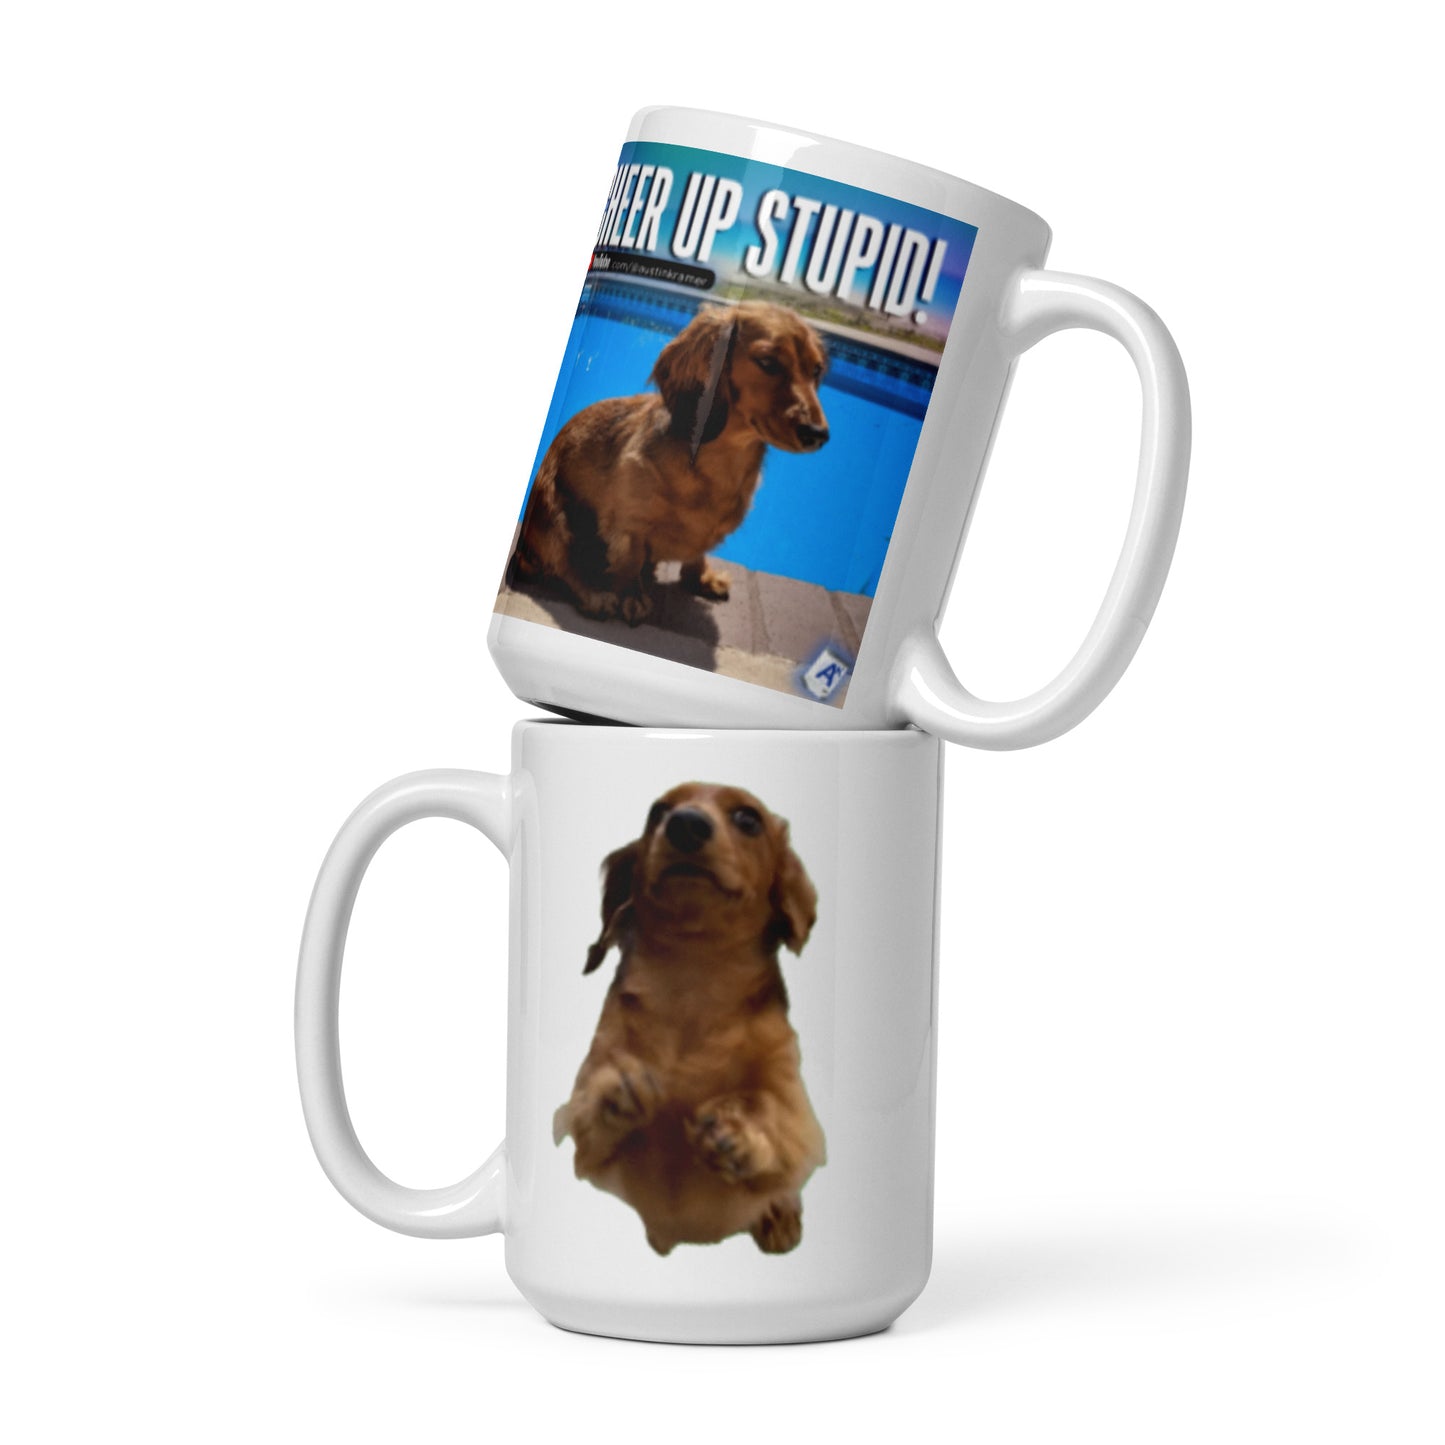 Cheer Up Stupid! Mug ft. Coco standin donce